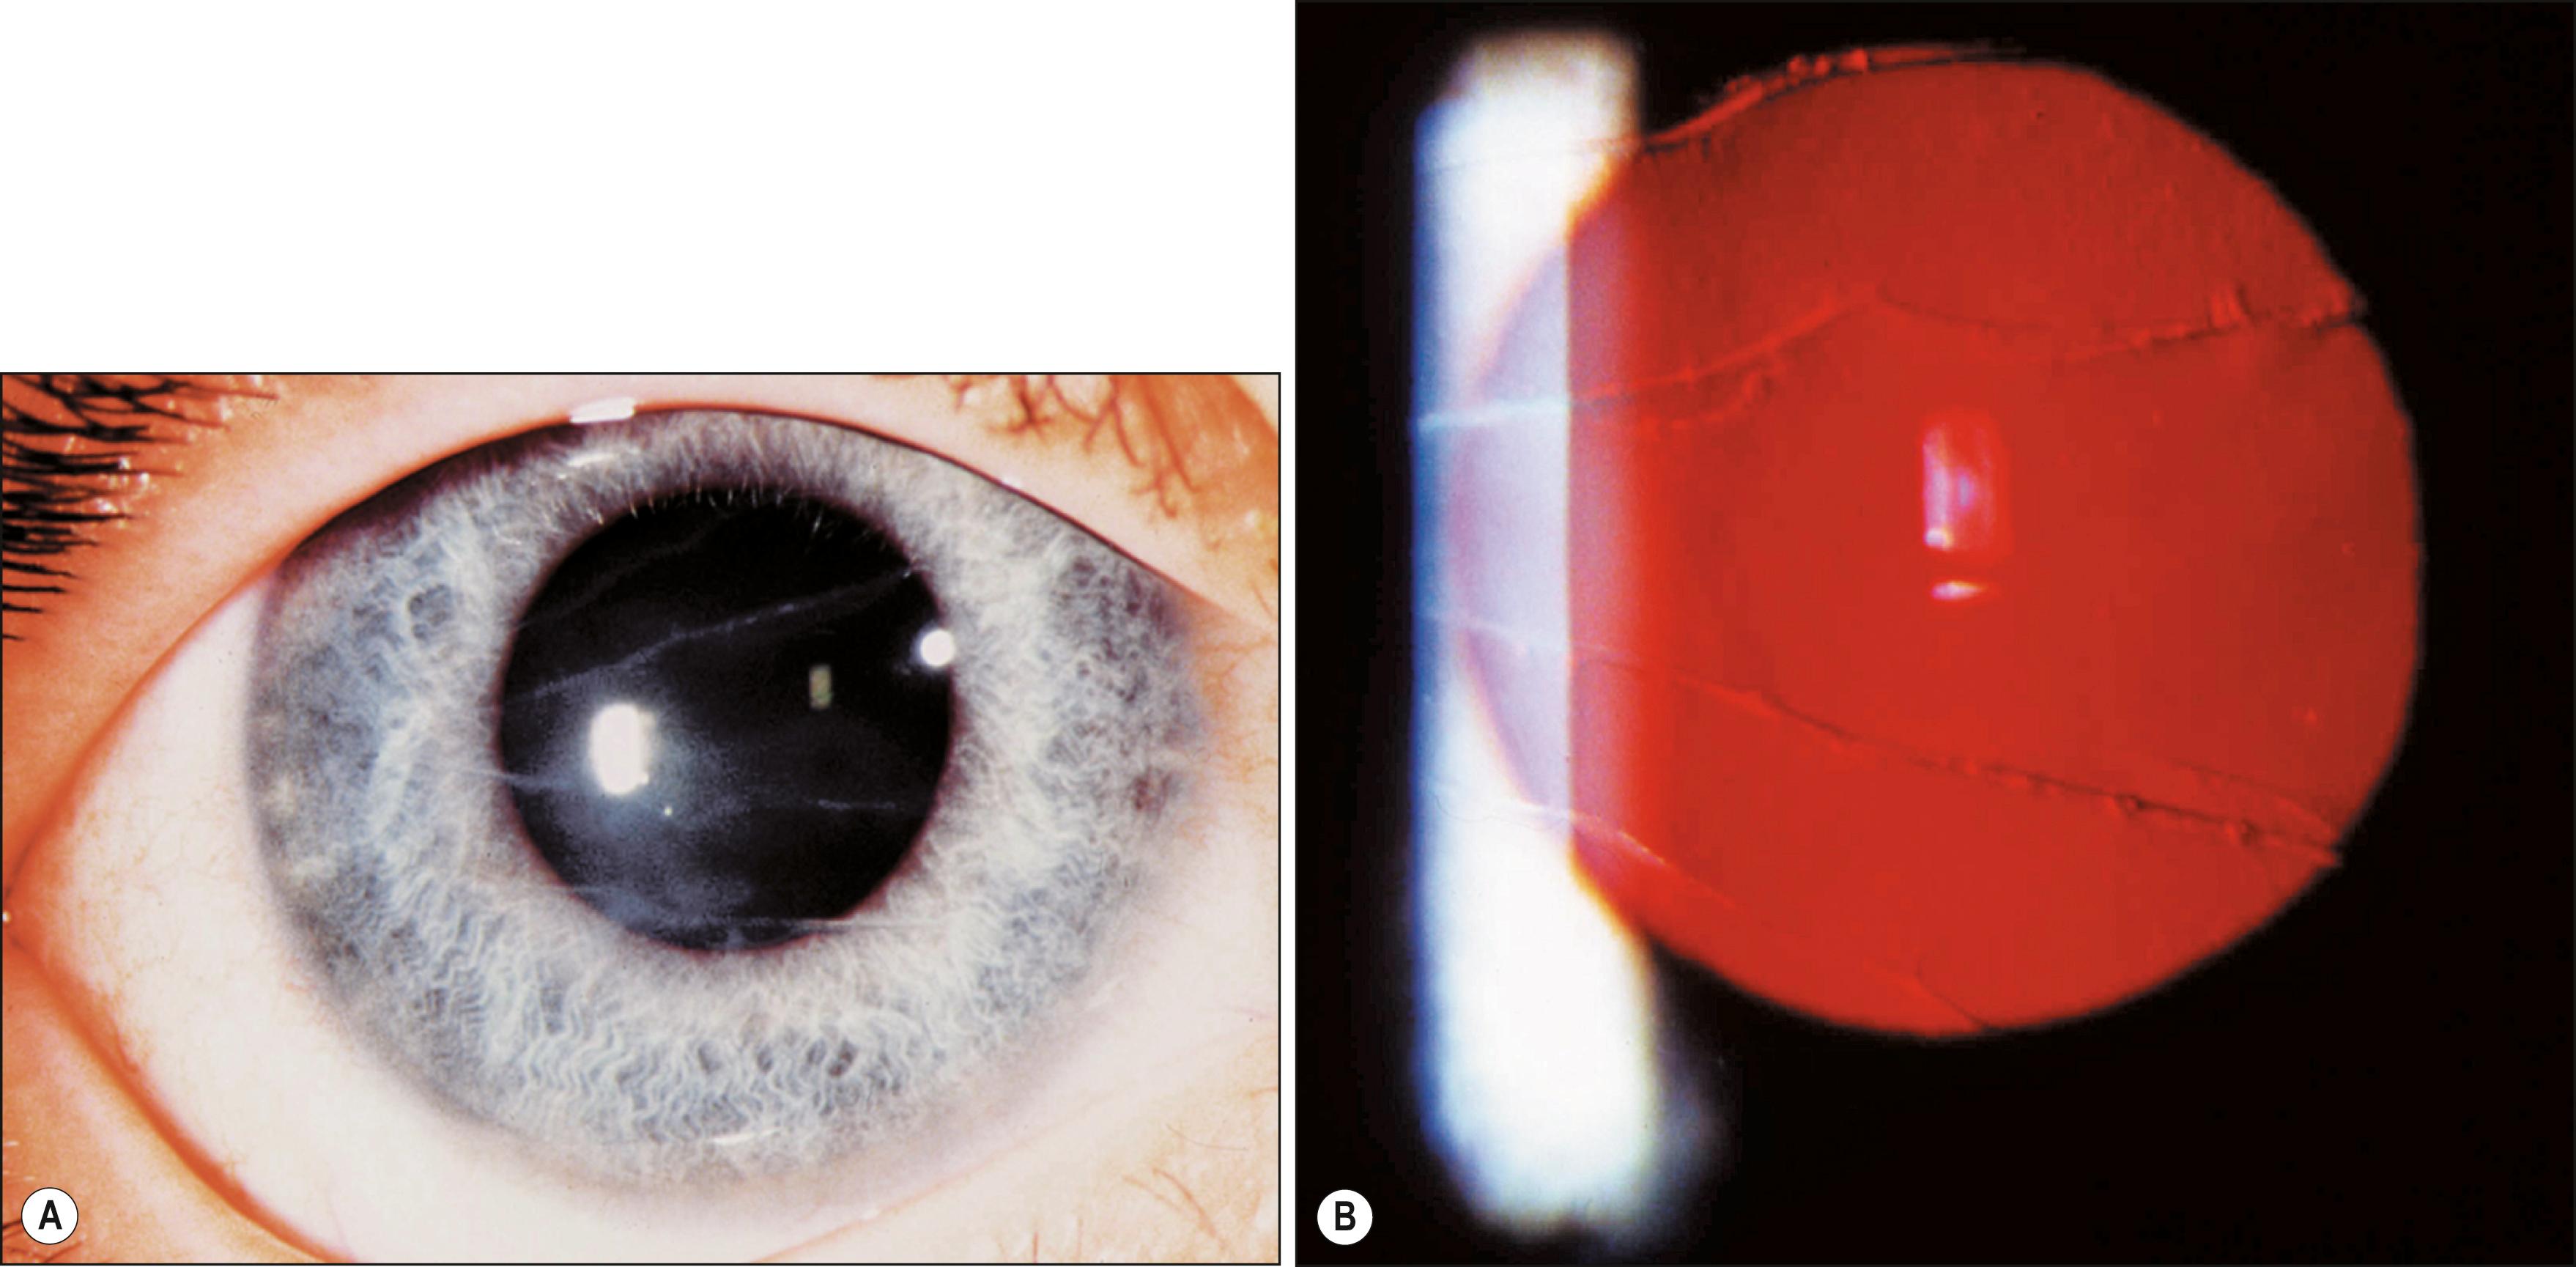 Fig. 18.8, Horizontal breaks in Descemet membrane (Haab striae) in an infant with congenital glaucoma: striae are seen in ( A ) direct illumination and ( B ) retroillumination.